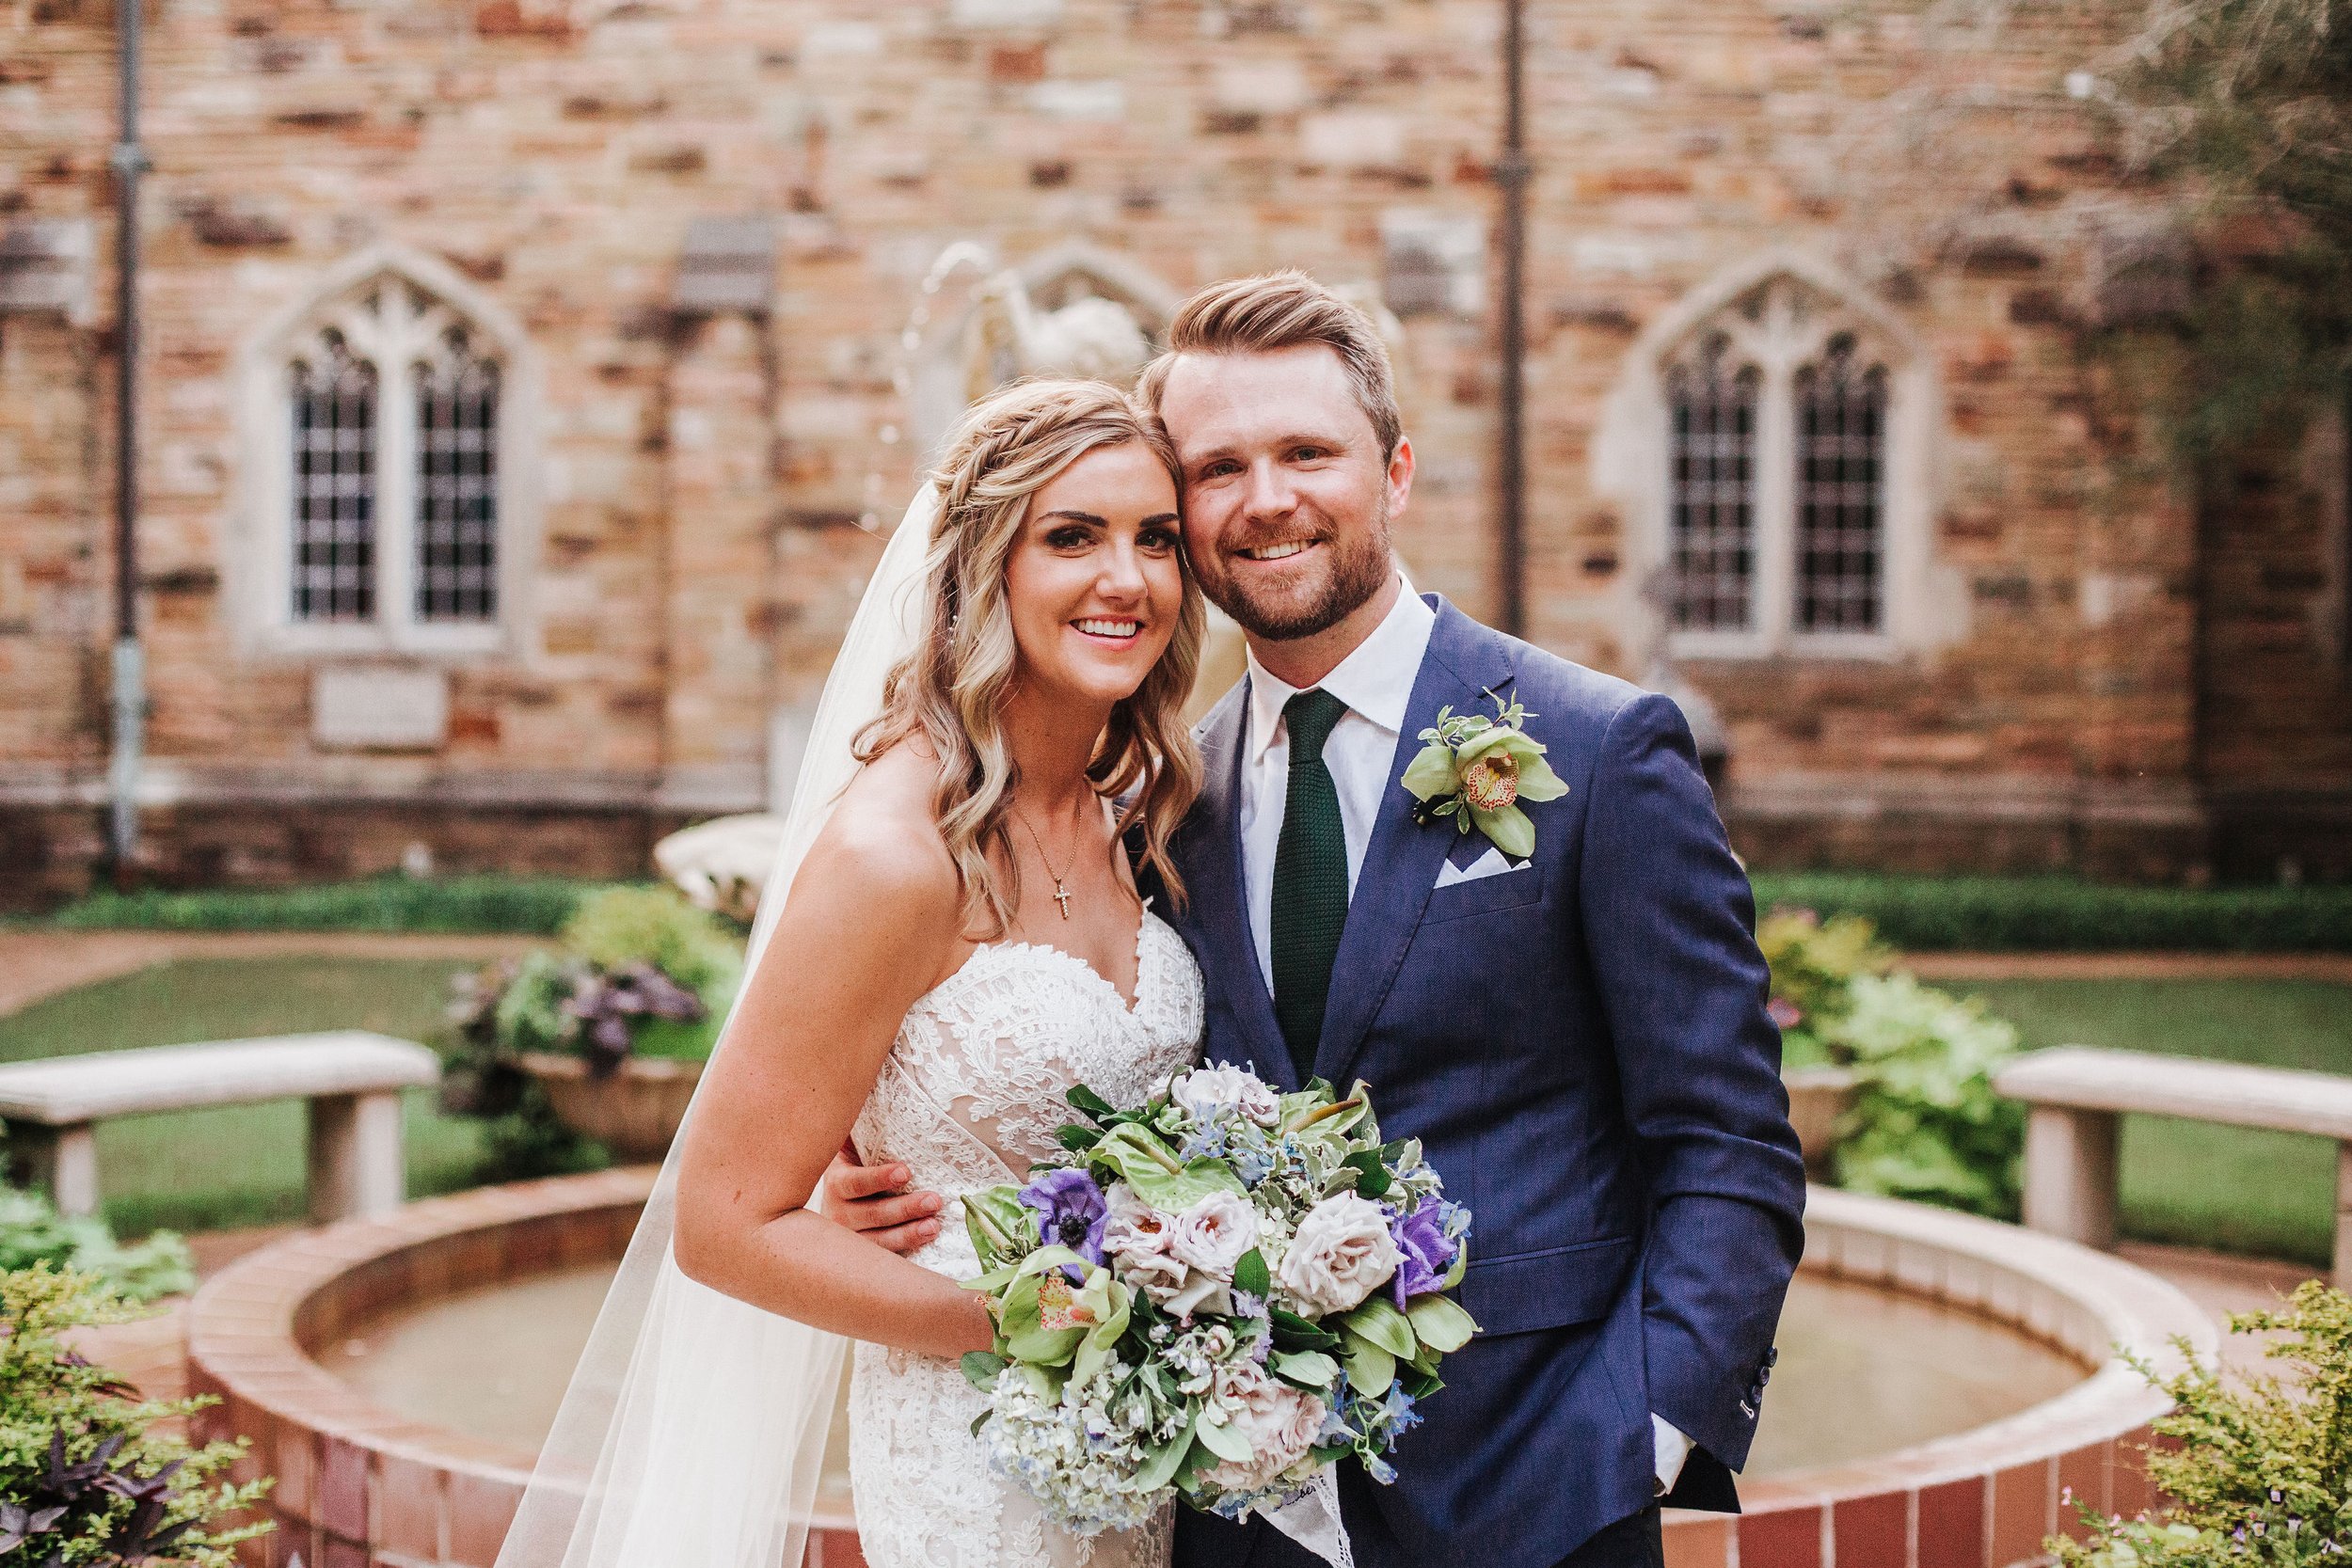  “Rachel is a dream. She is an incredibly talented artist that has the unique ability to capture the life and soul of a moment. Rachel is attentive, easy to work with and extremely thoughtful. My wedding video encapsulated all the excitement and love